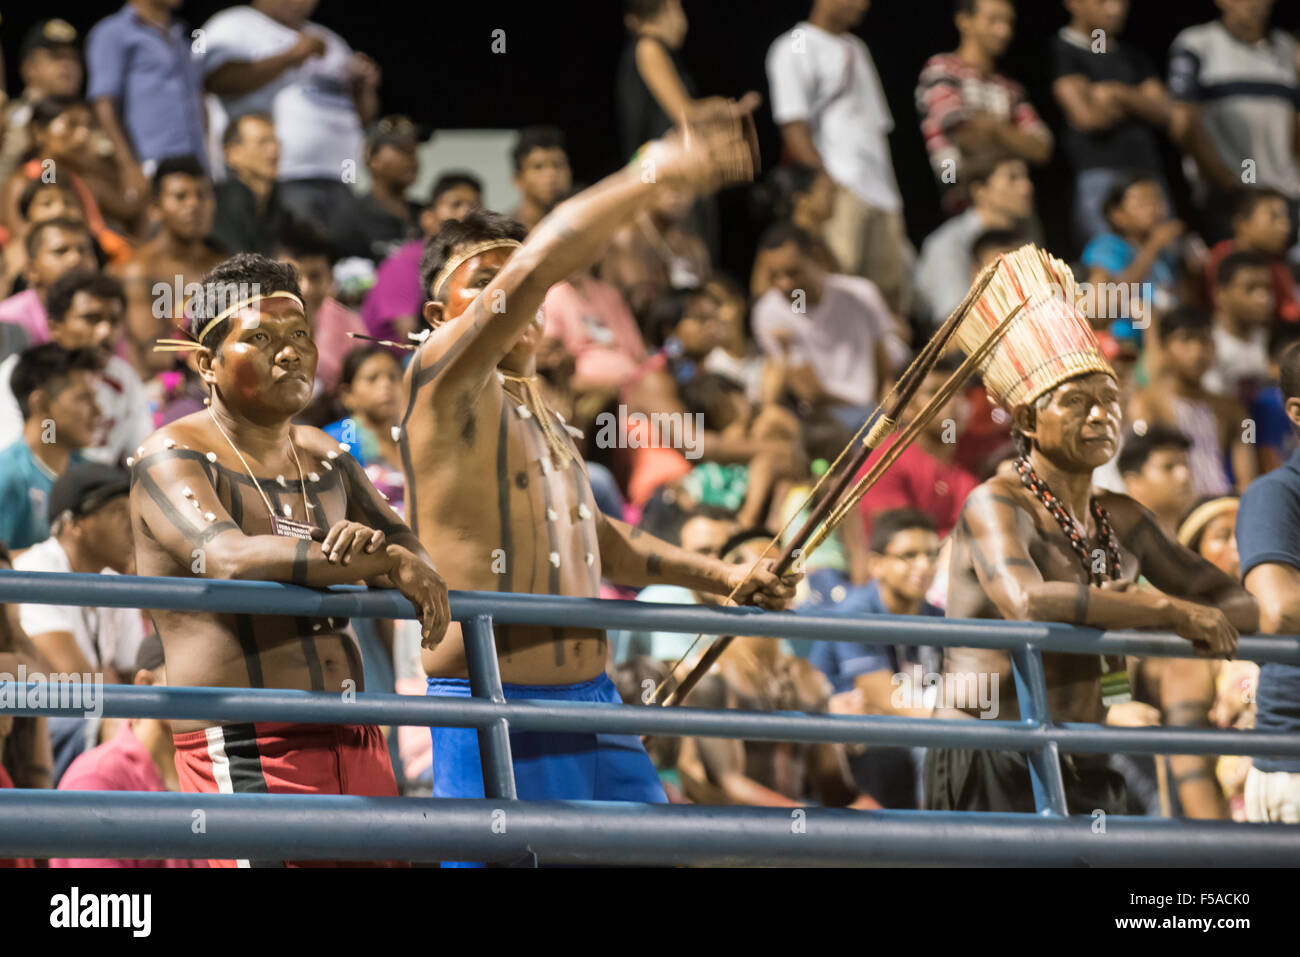 Palmas, Brazil. 30th October, 2015. Xerente warriors cheer in support of their women's team during the final of the women's football, between the local Xerente tribe and the Native American team from the USA at the International Indigenous Games in the city of Palmas, Tocantins State, Brazil. The USA won on a penalty shoot-out after a 0-0 match. Credit:  Sue Cunningham Photographic/Alamy Live News Stock Photo